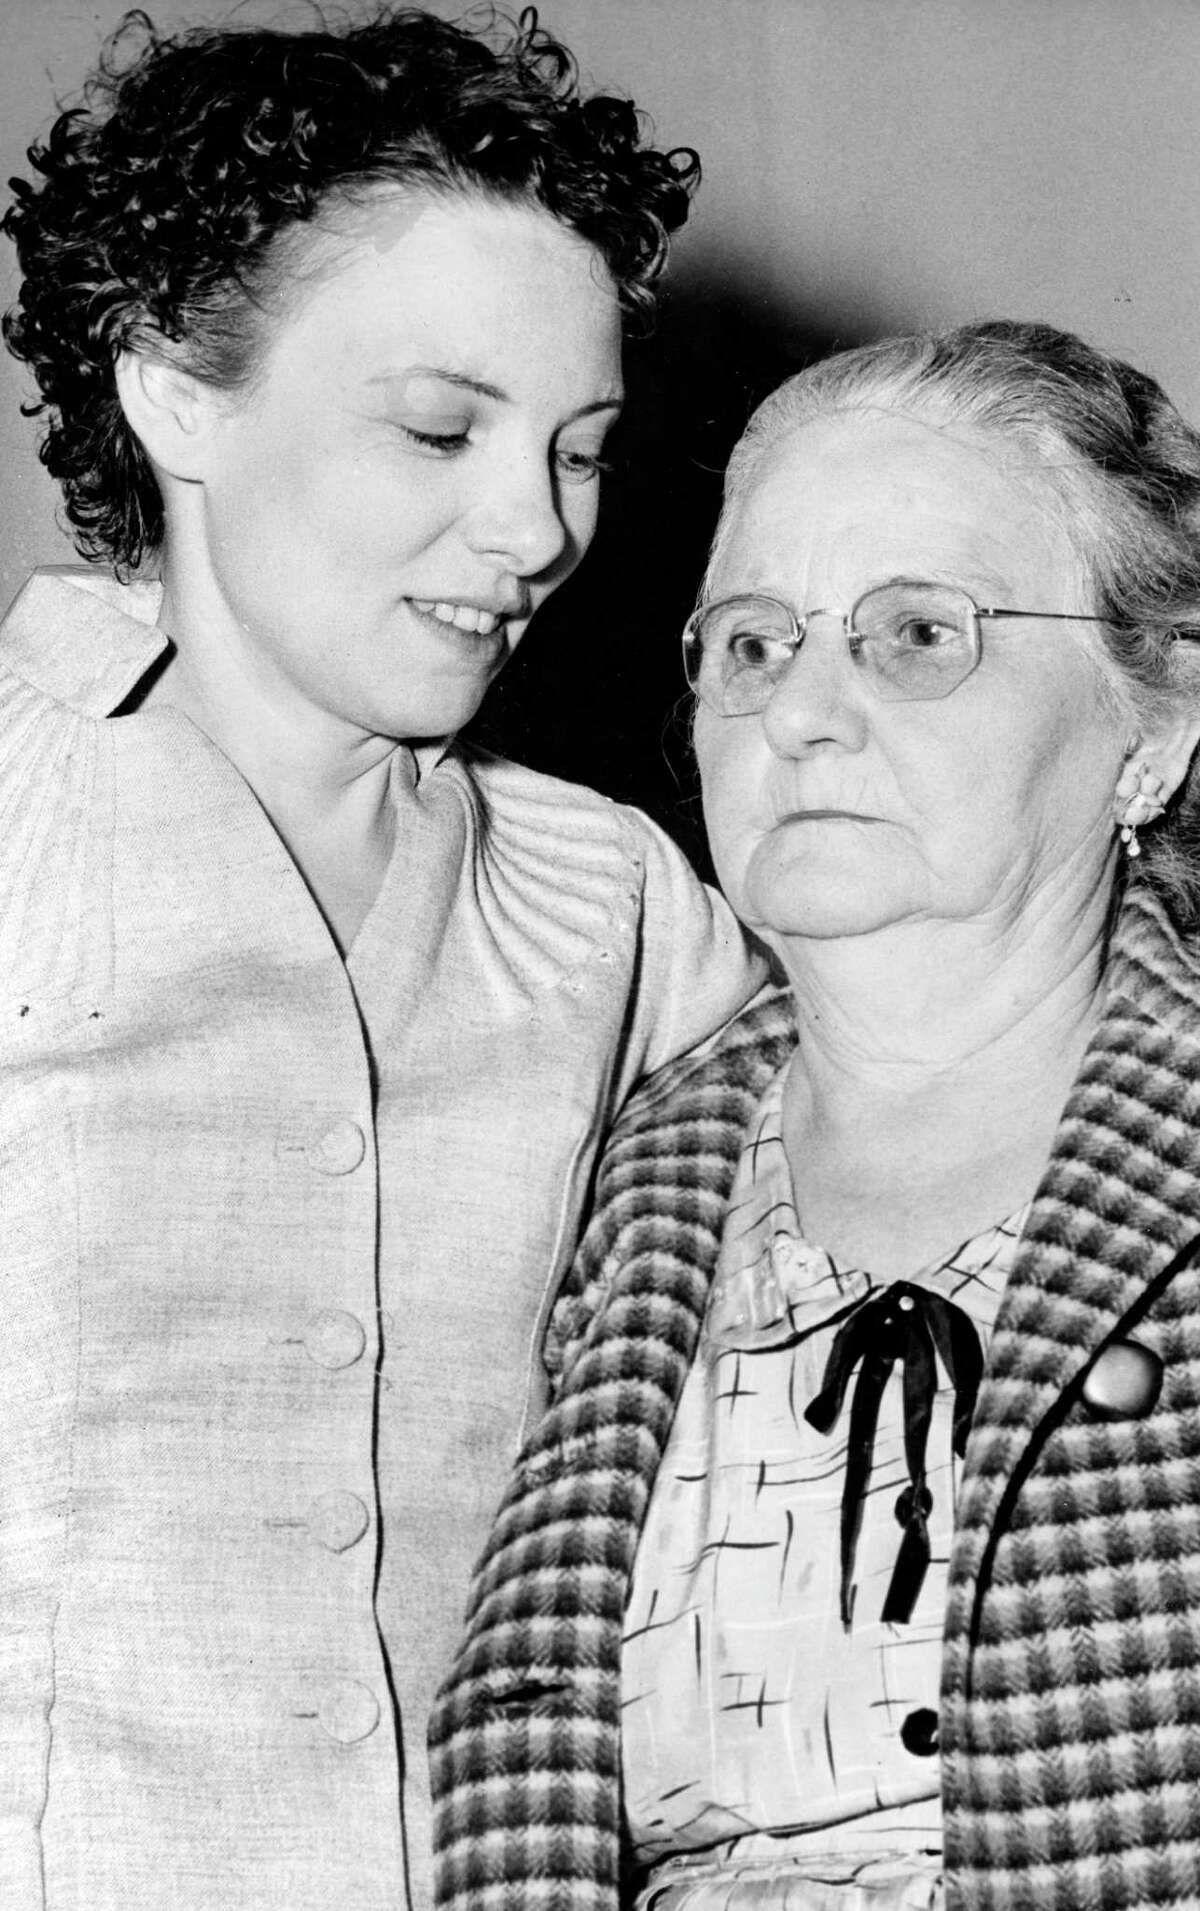 From the March 10, 1955, Houston Post: Mrs. Ann Williams, who often cried as she told officers how she killed and dismembered her two young sons, was smiling Wednesday as she was baptized in the County Jail. She told the Rev. C.O. Campbell she was happier because she felt God had forgiven her. With her was her mother, Mrs. Henrietta Havill.